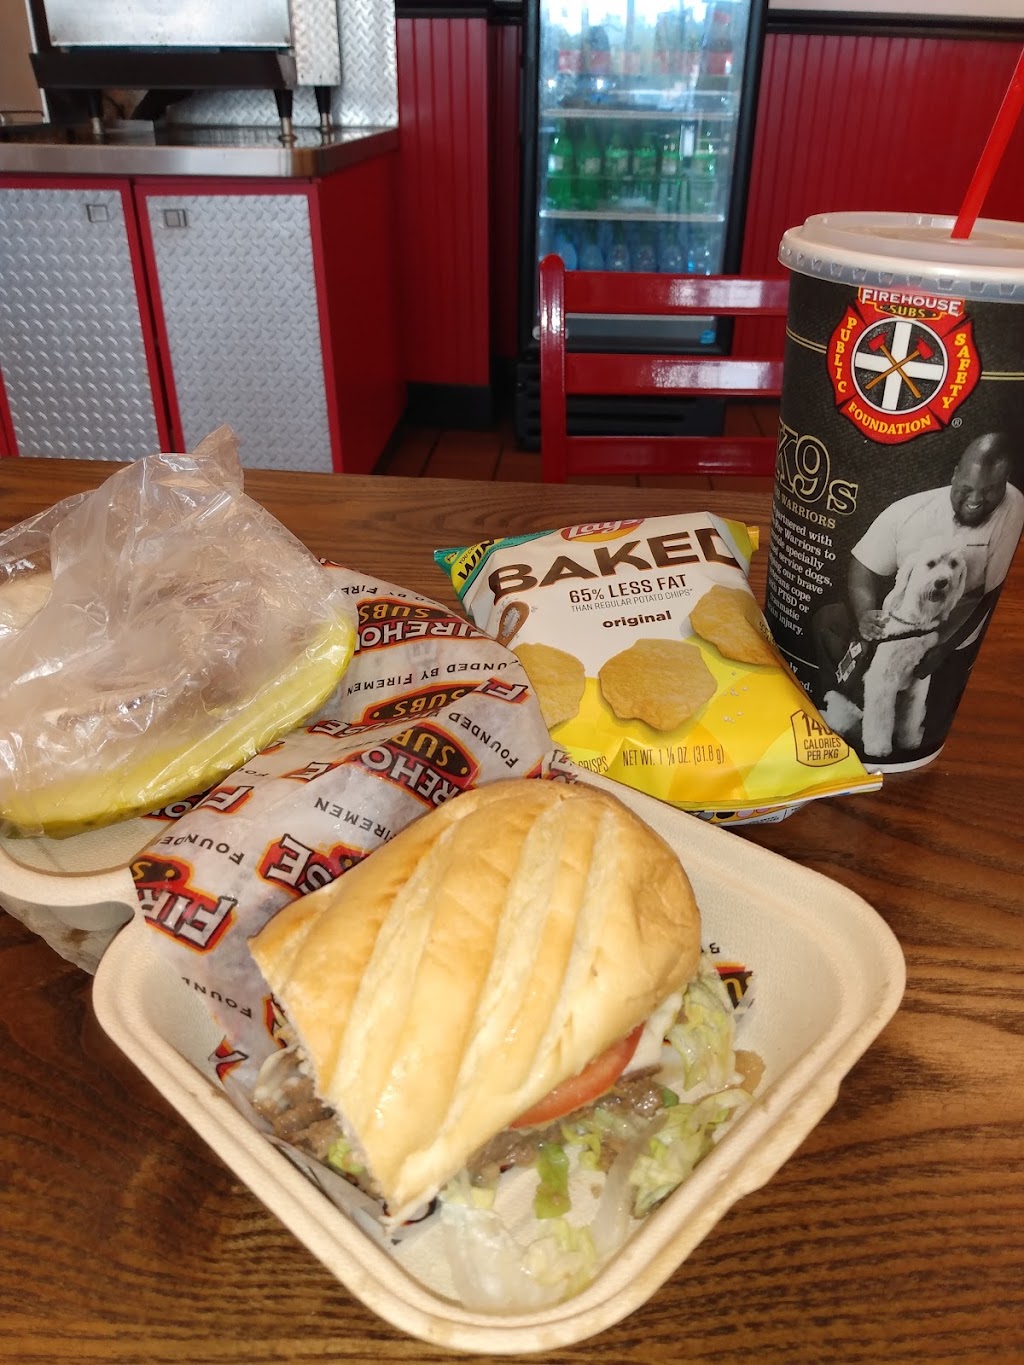 Firehouse Subs Colonial Heights | 334 Southpark Cir, Colonial Heights, VA 23834, USA | Phone: (804) 524-9500